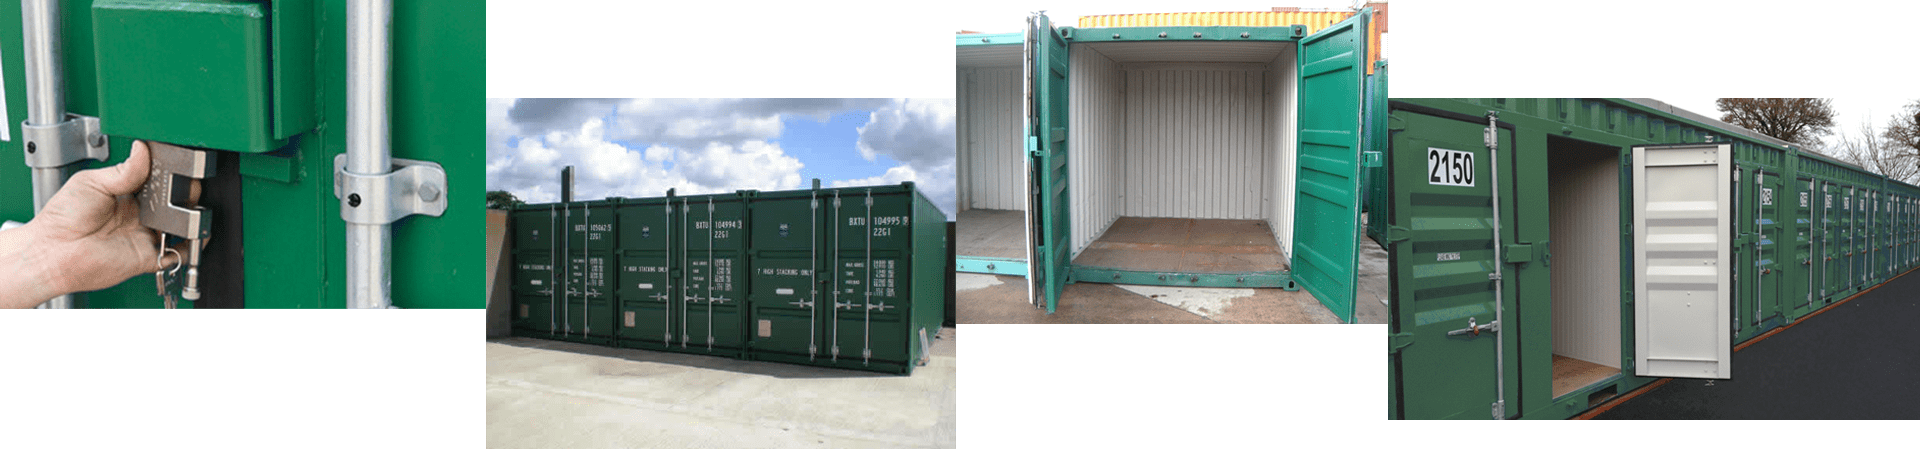 Selection of images showing BigD Storage's containers